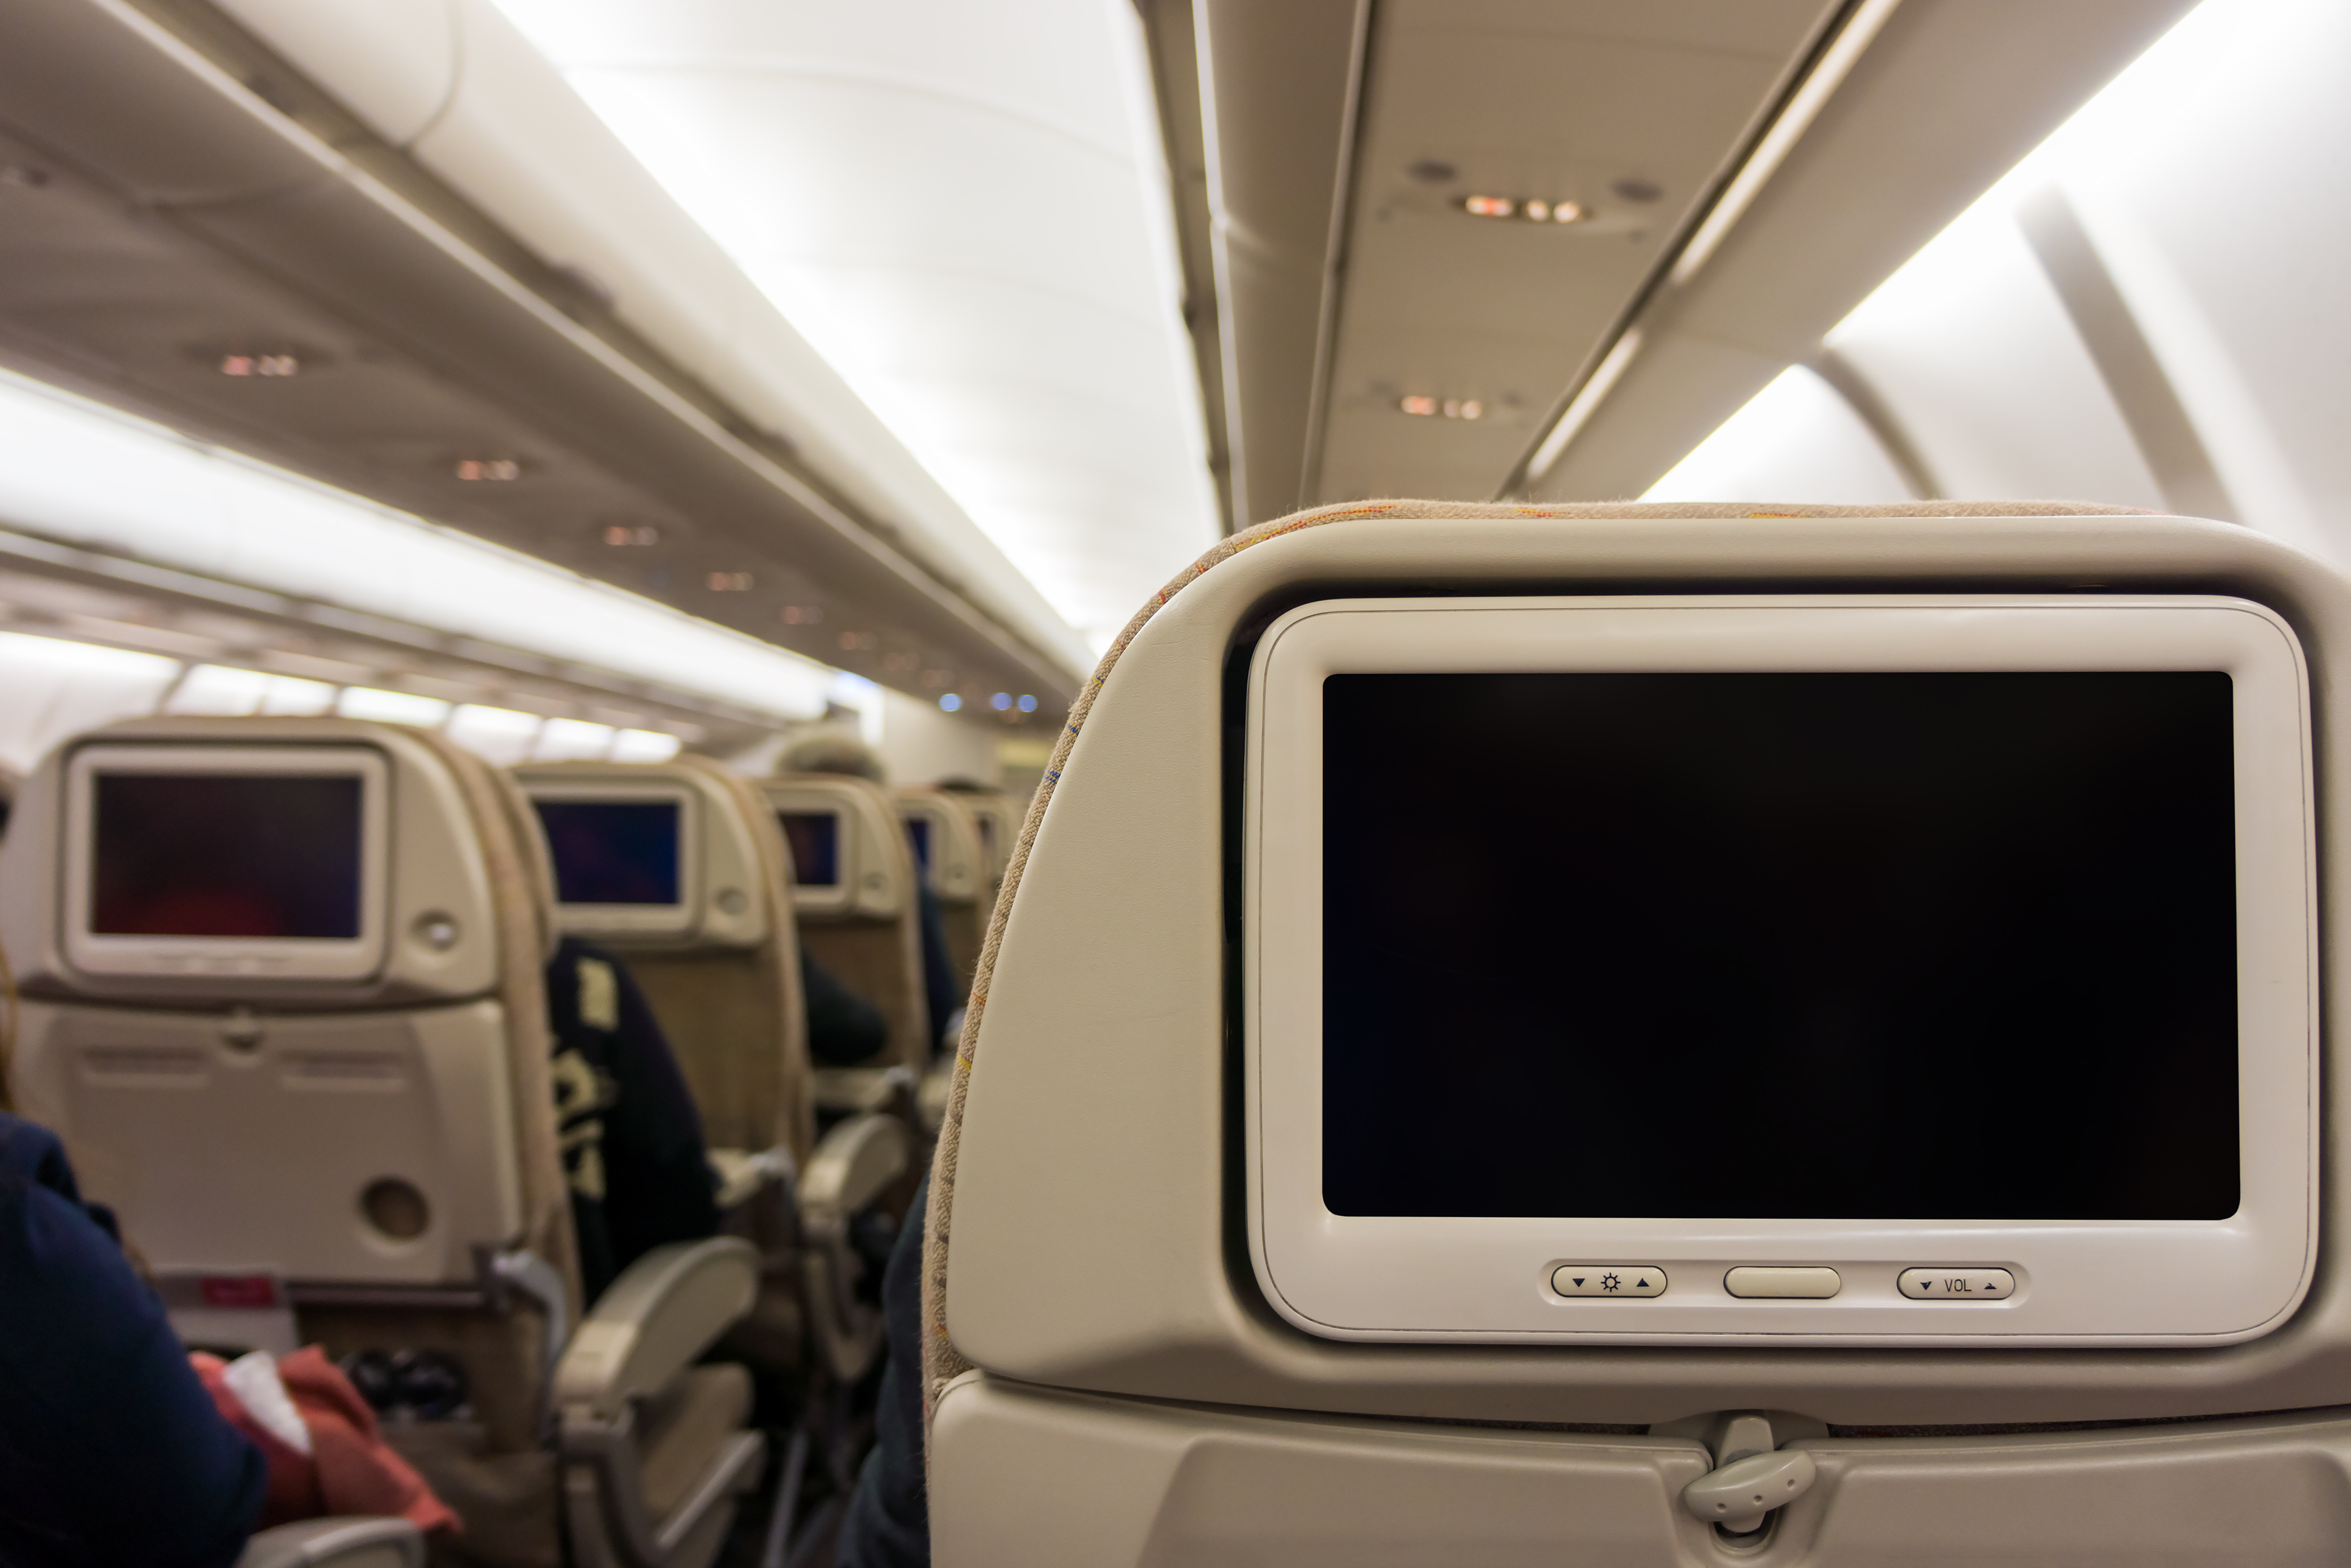 Southwest Airlines Now Offers In-Flight Entertainment For Free